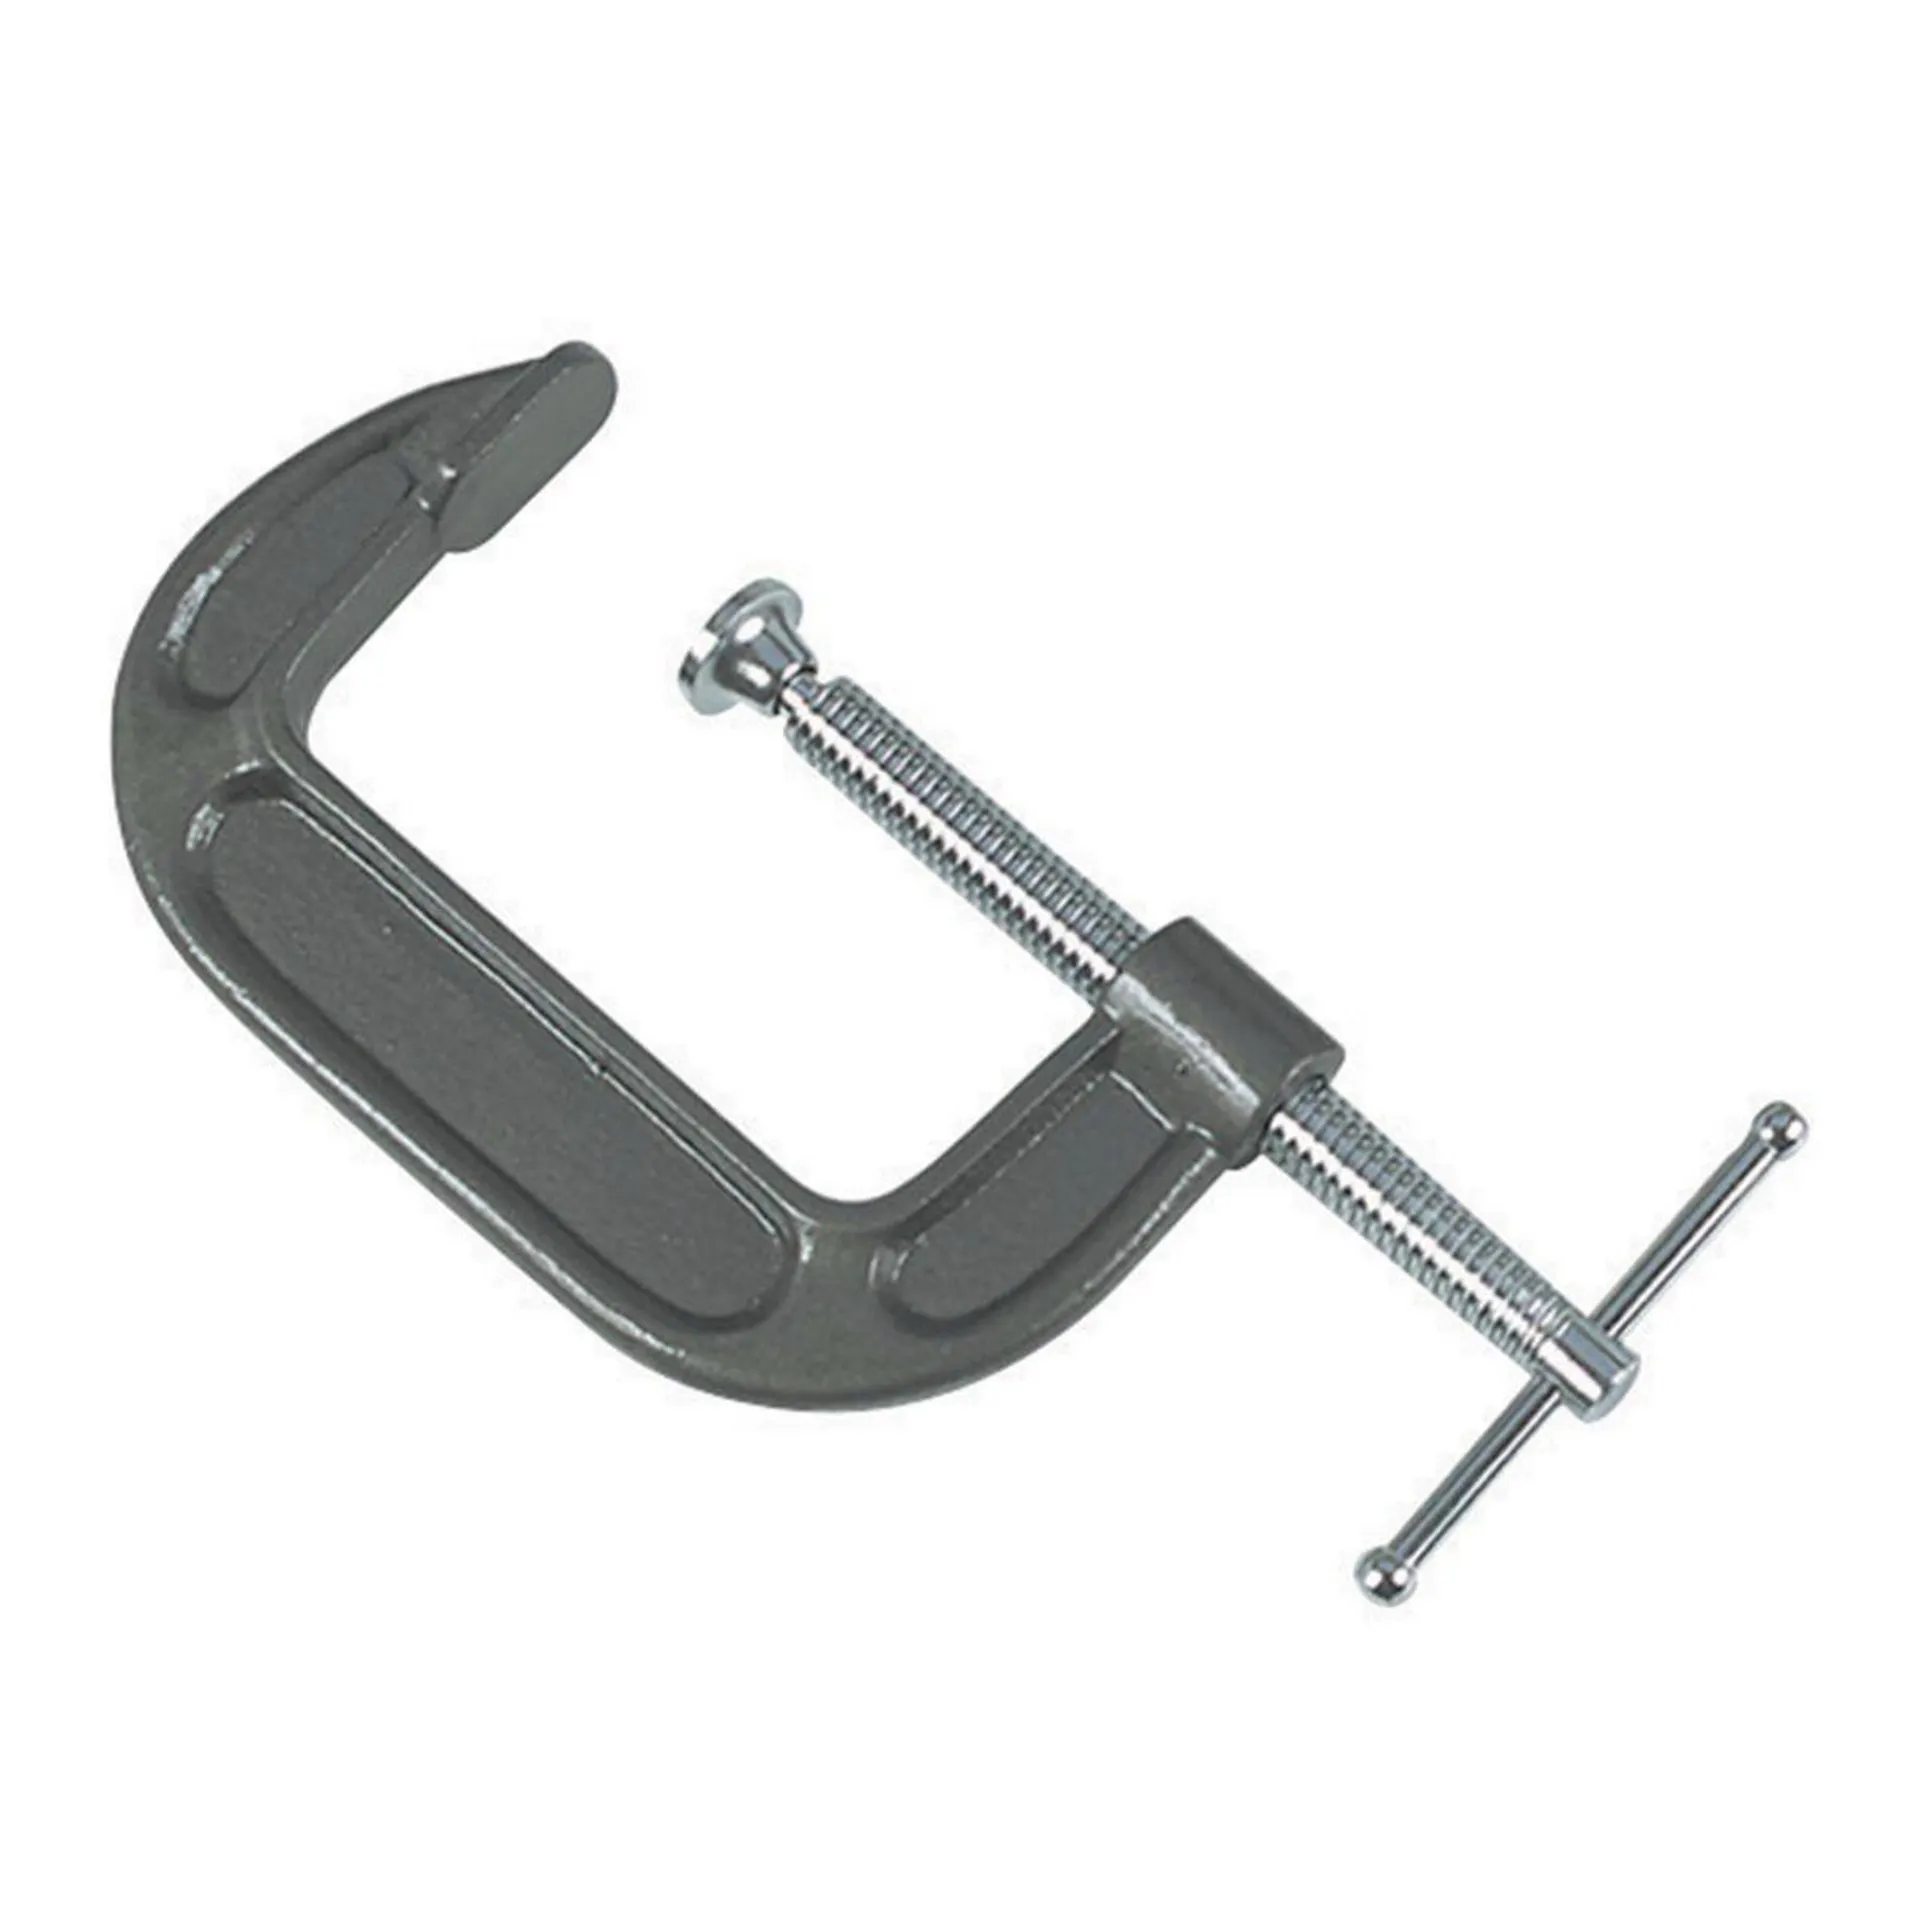 PITTSBURGH 6 in. C-Clamp